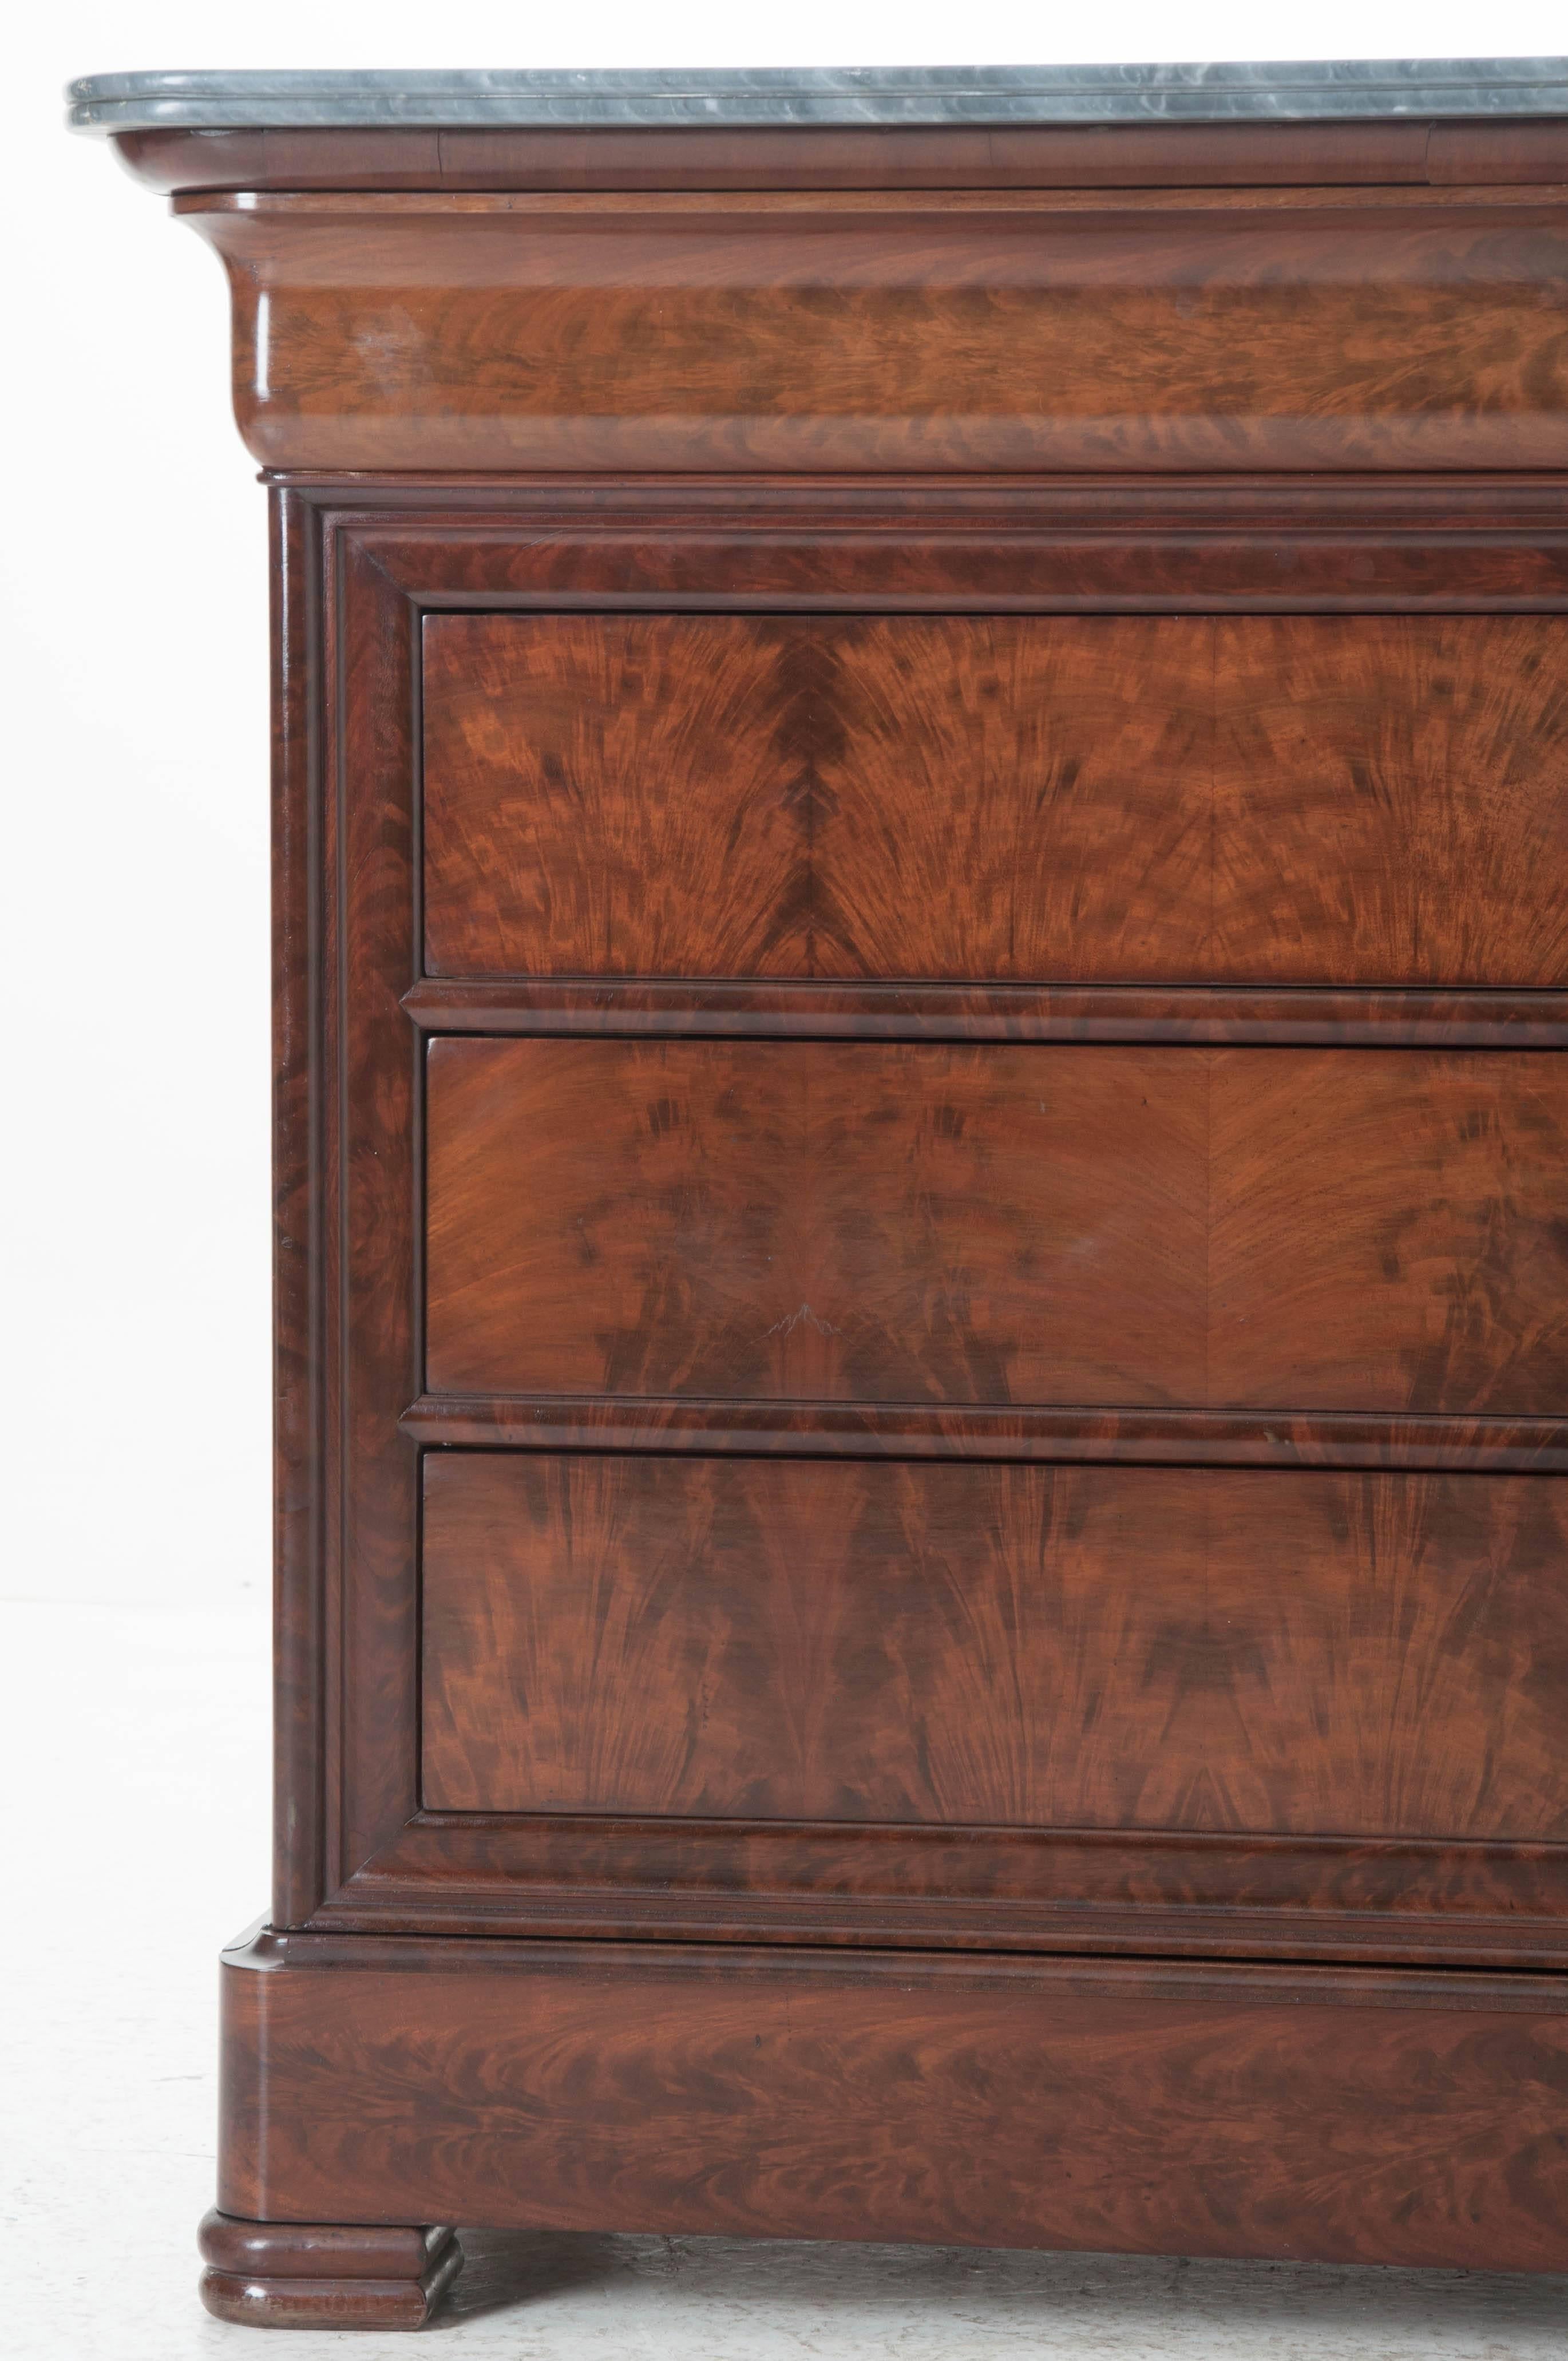 A spectacular five-drawer French mahogany commode with exceptional gray marble top. Louis Philippe style is refined, linear, and restrained. This Louis Philippe commode is all of that and more. The facade is finished in meticulously bookmatched